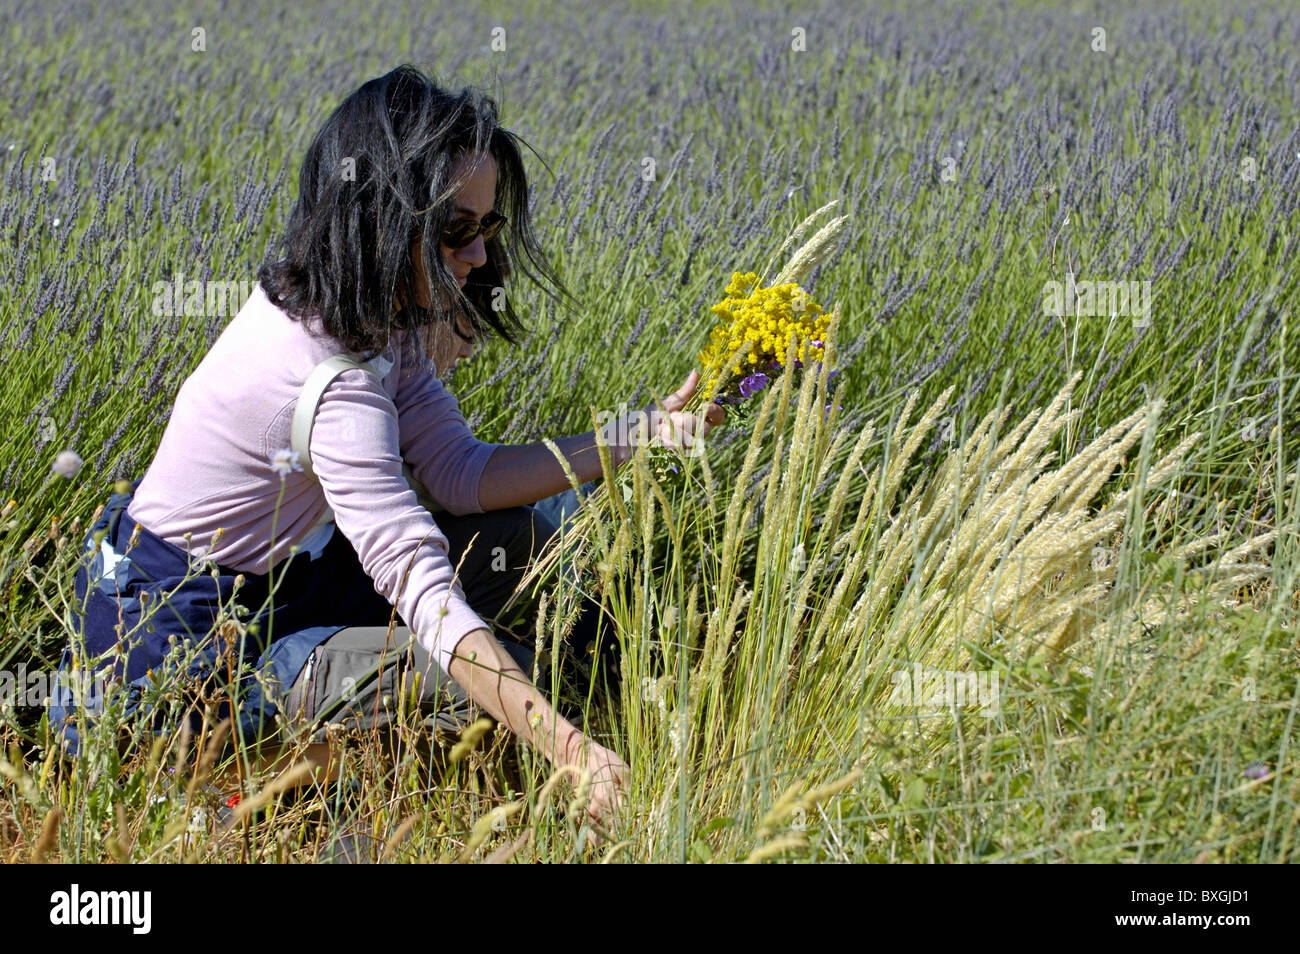 Woman kneeling while picking wildflowers in a lavender field. Stock Photo